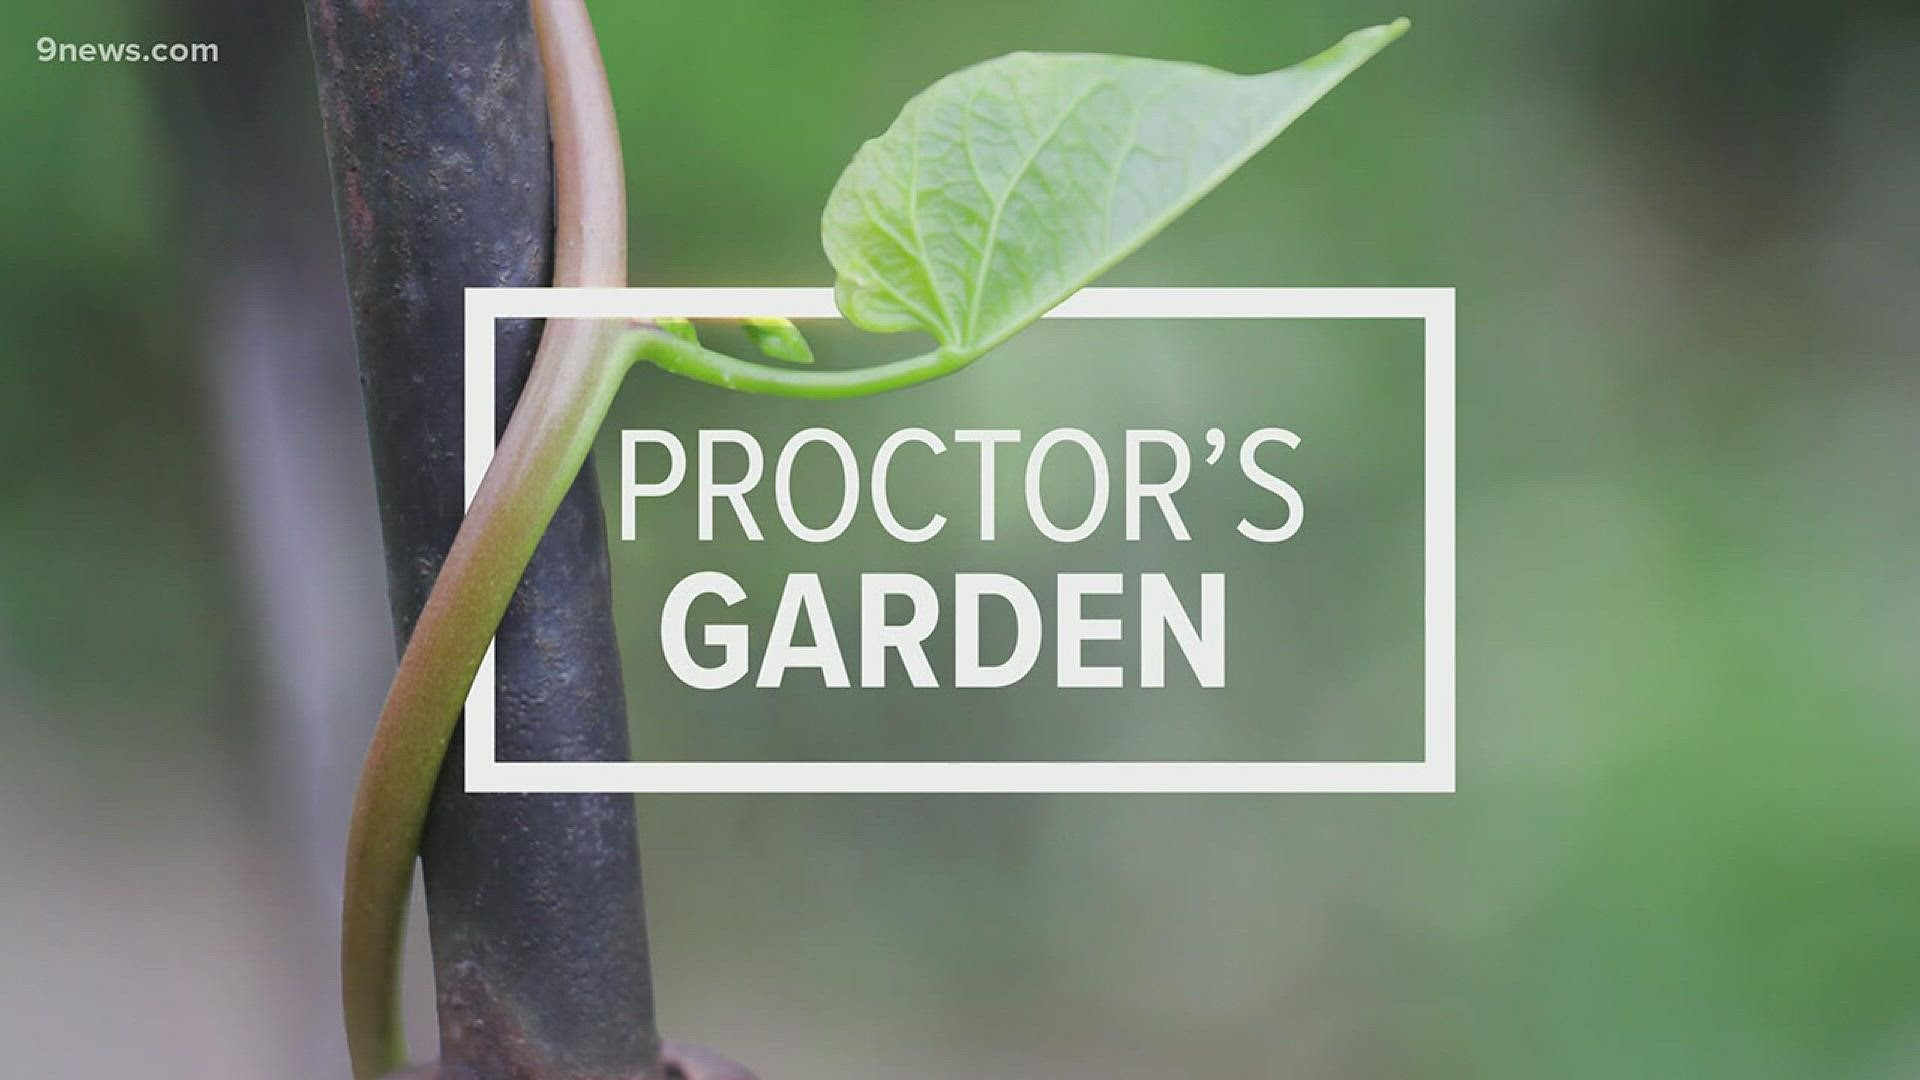 Rob Proctor has some suggestions for plants to help clear the air inside your home.